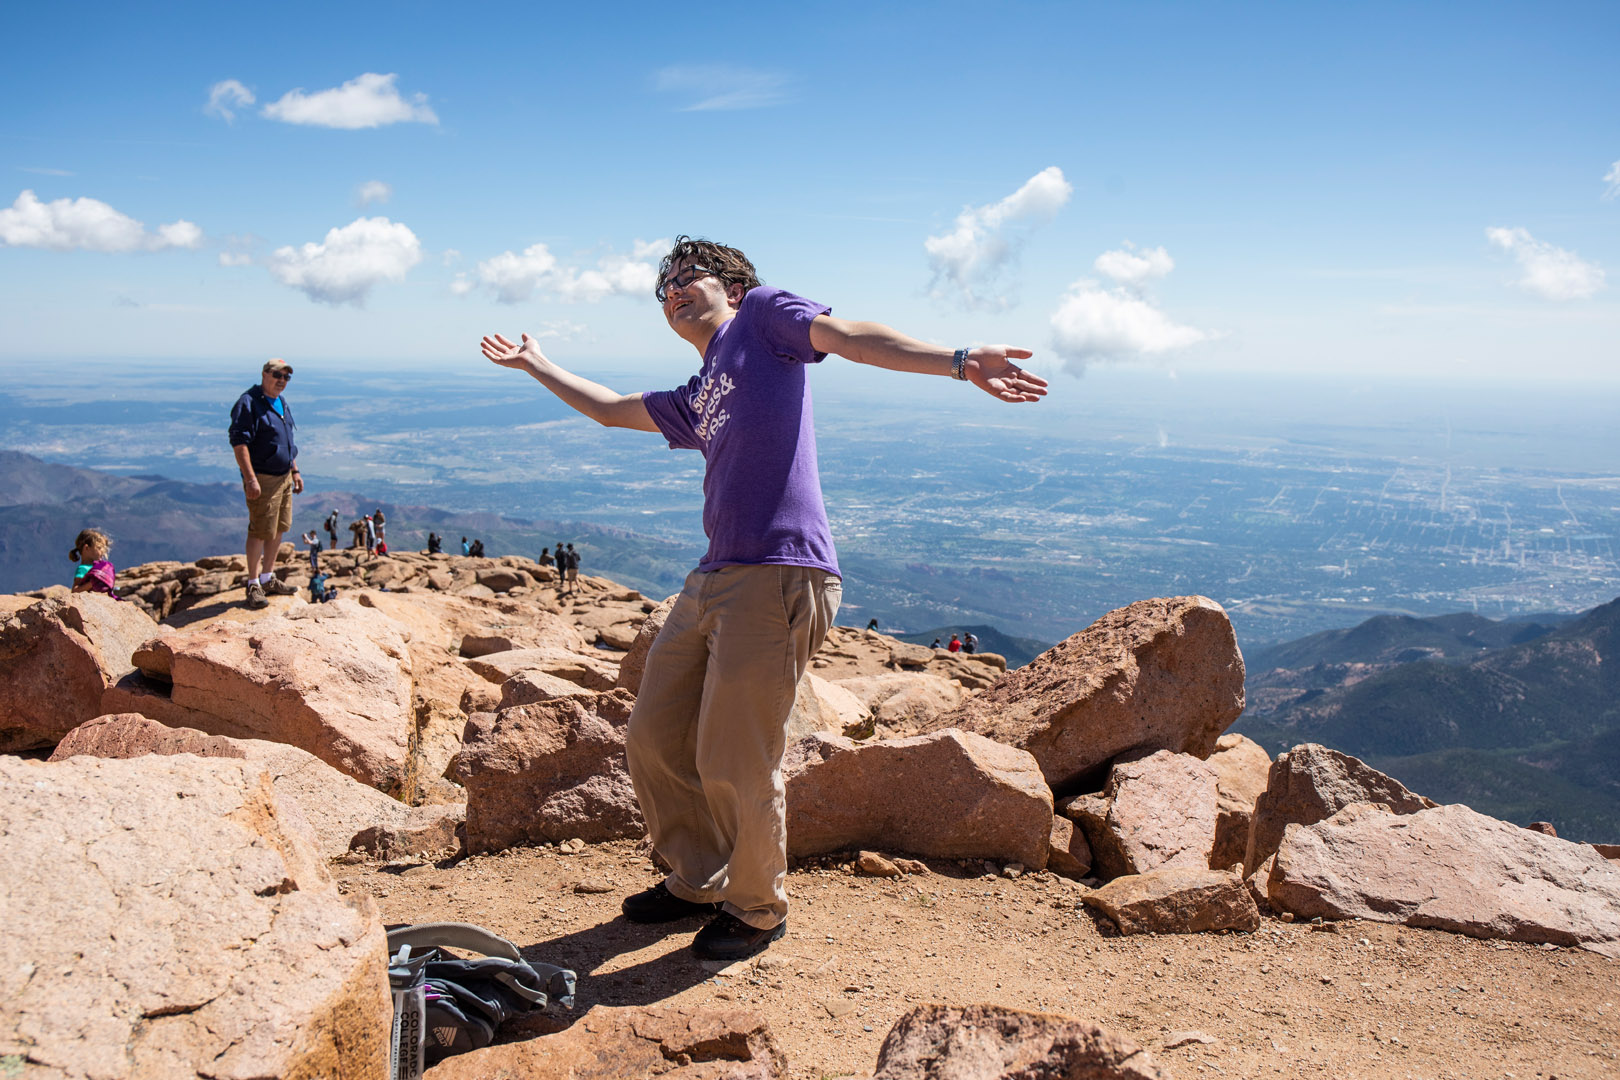 “I don’t really do normal very well,” joked <strong>Ian Widmann ’23</strong> during a photo op on the summit of Pikes Peak. Photo Jennifer Coombes